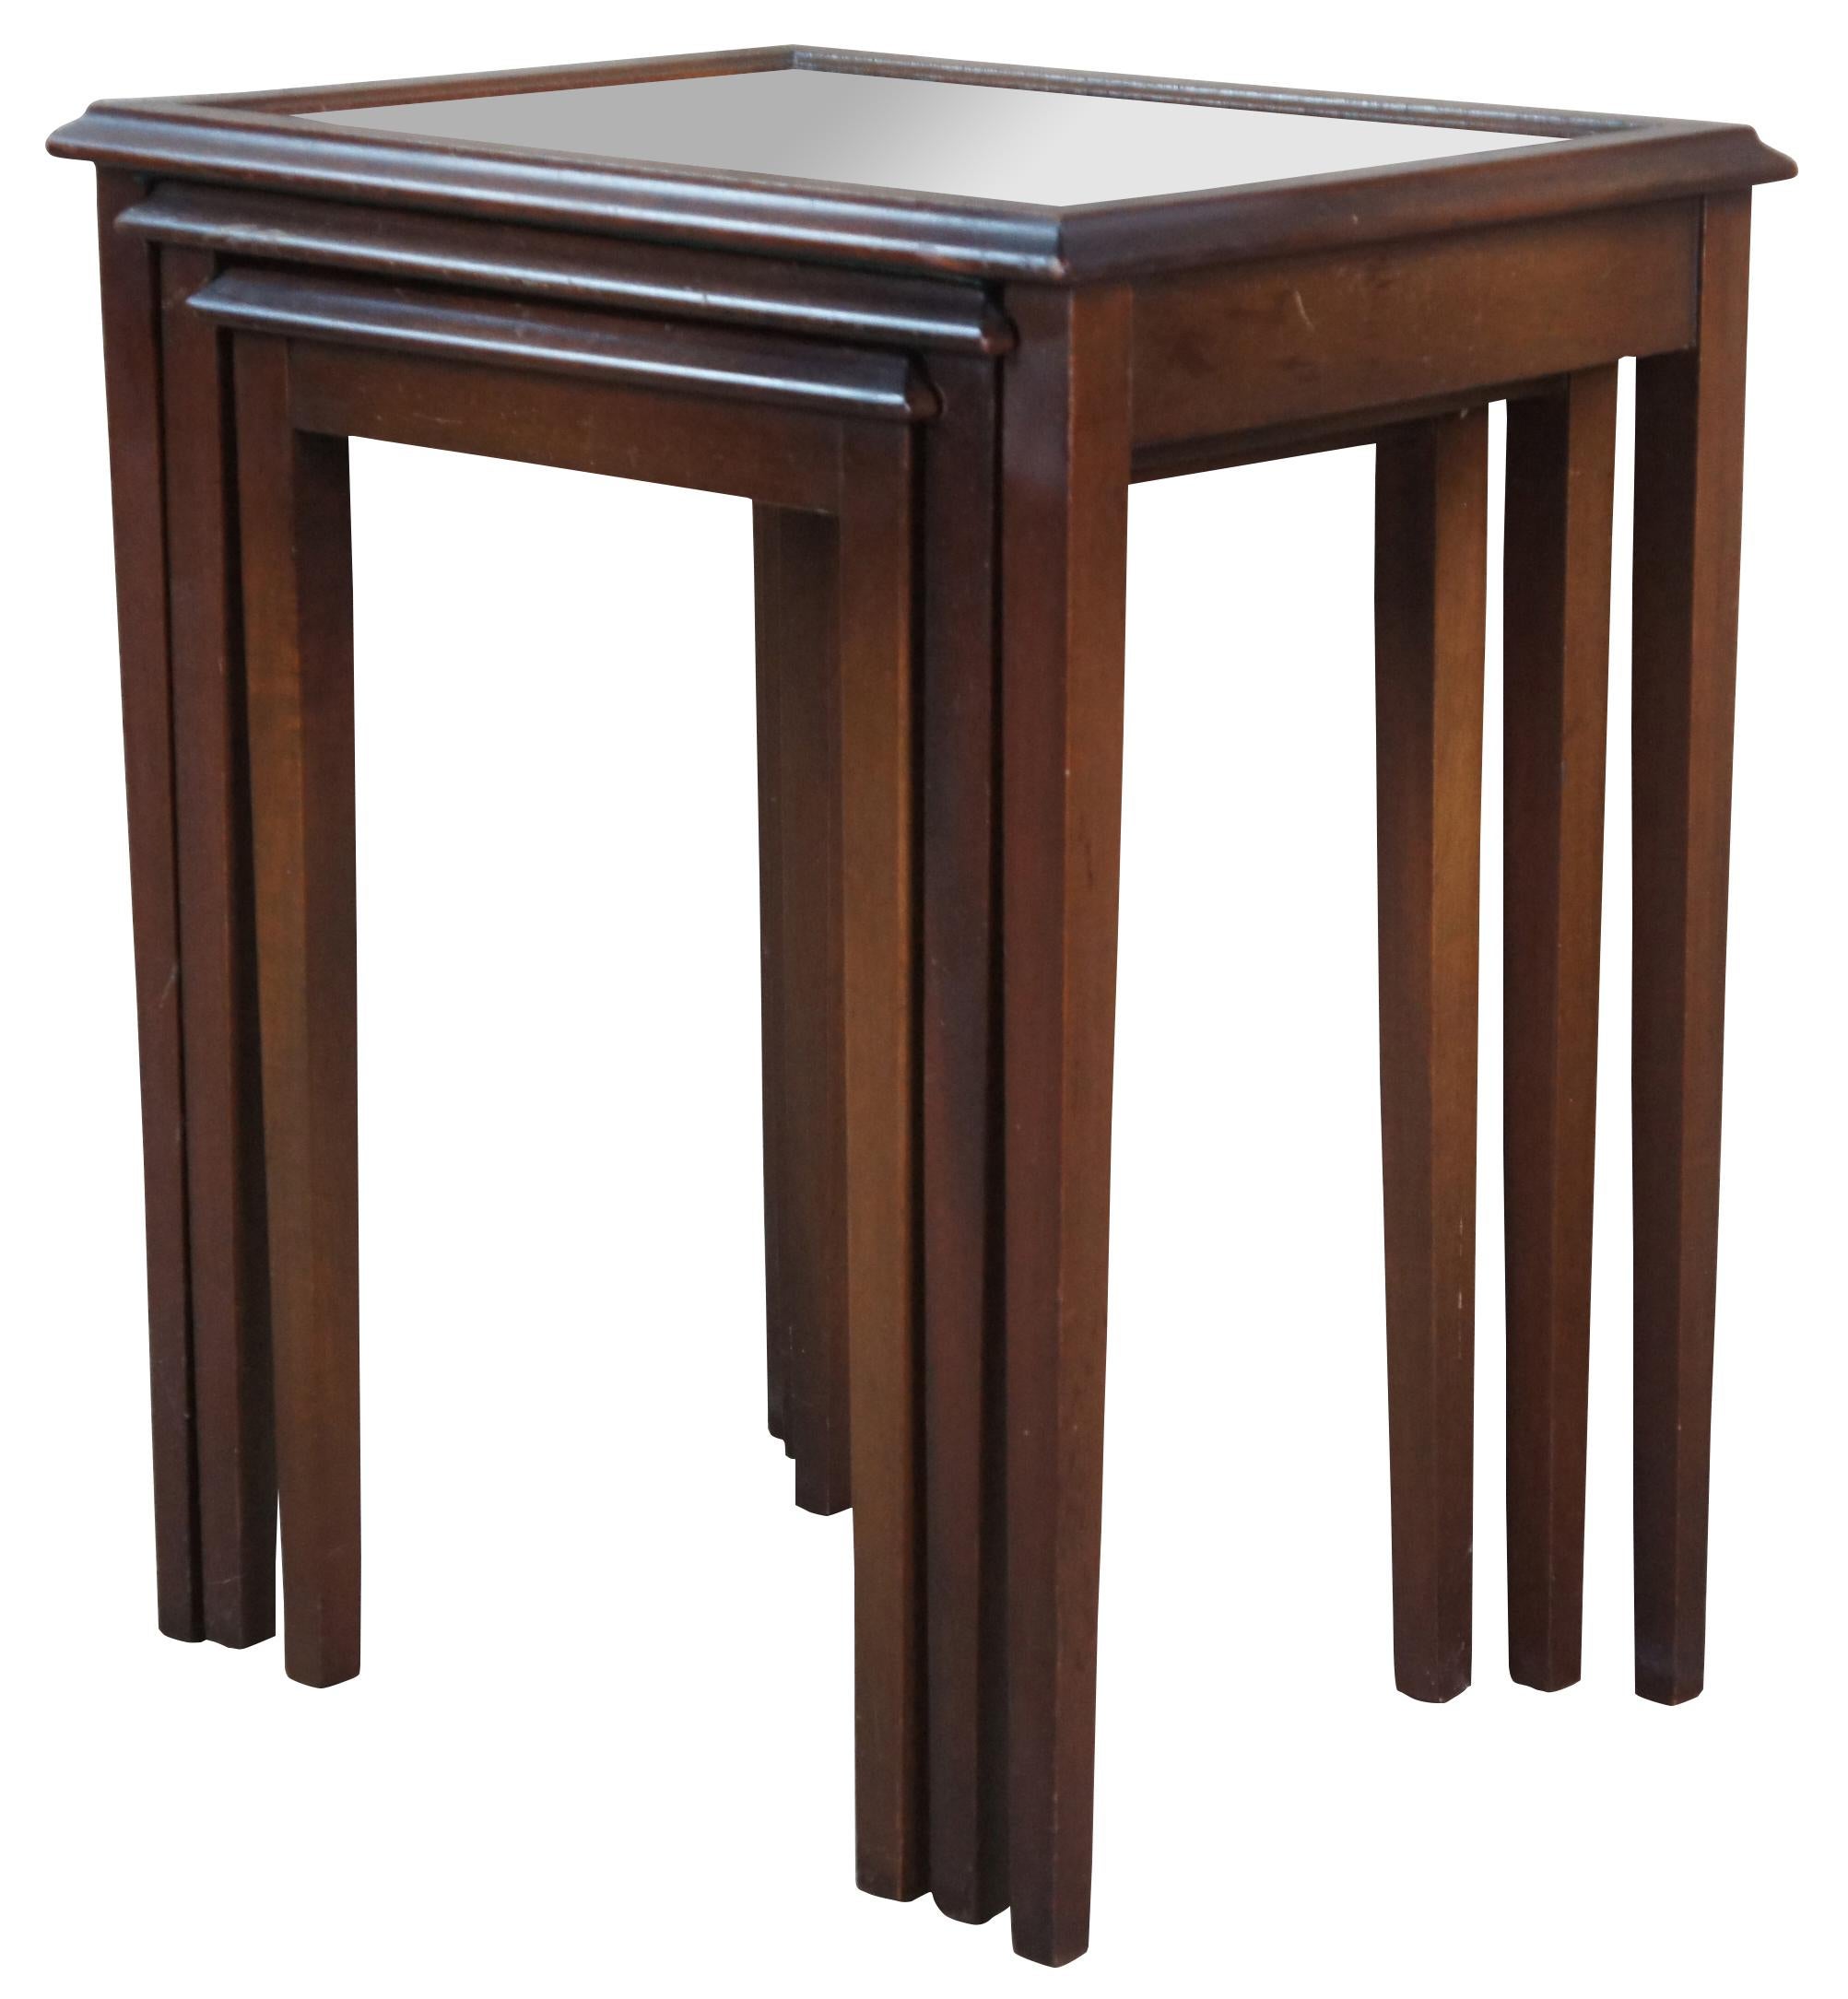 Nest of three antique Ferguson Bros Mfg Co side tables. Made of mahogany featuring a ogee edge, tapered legs, and glass tops. 5484.

Ferguson Brothers Manufacturing Company (founded 1878 in New York City) was was wholesale manufacturer of